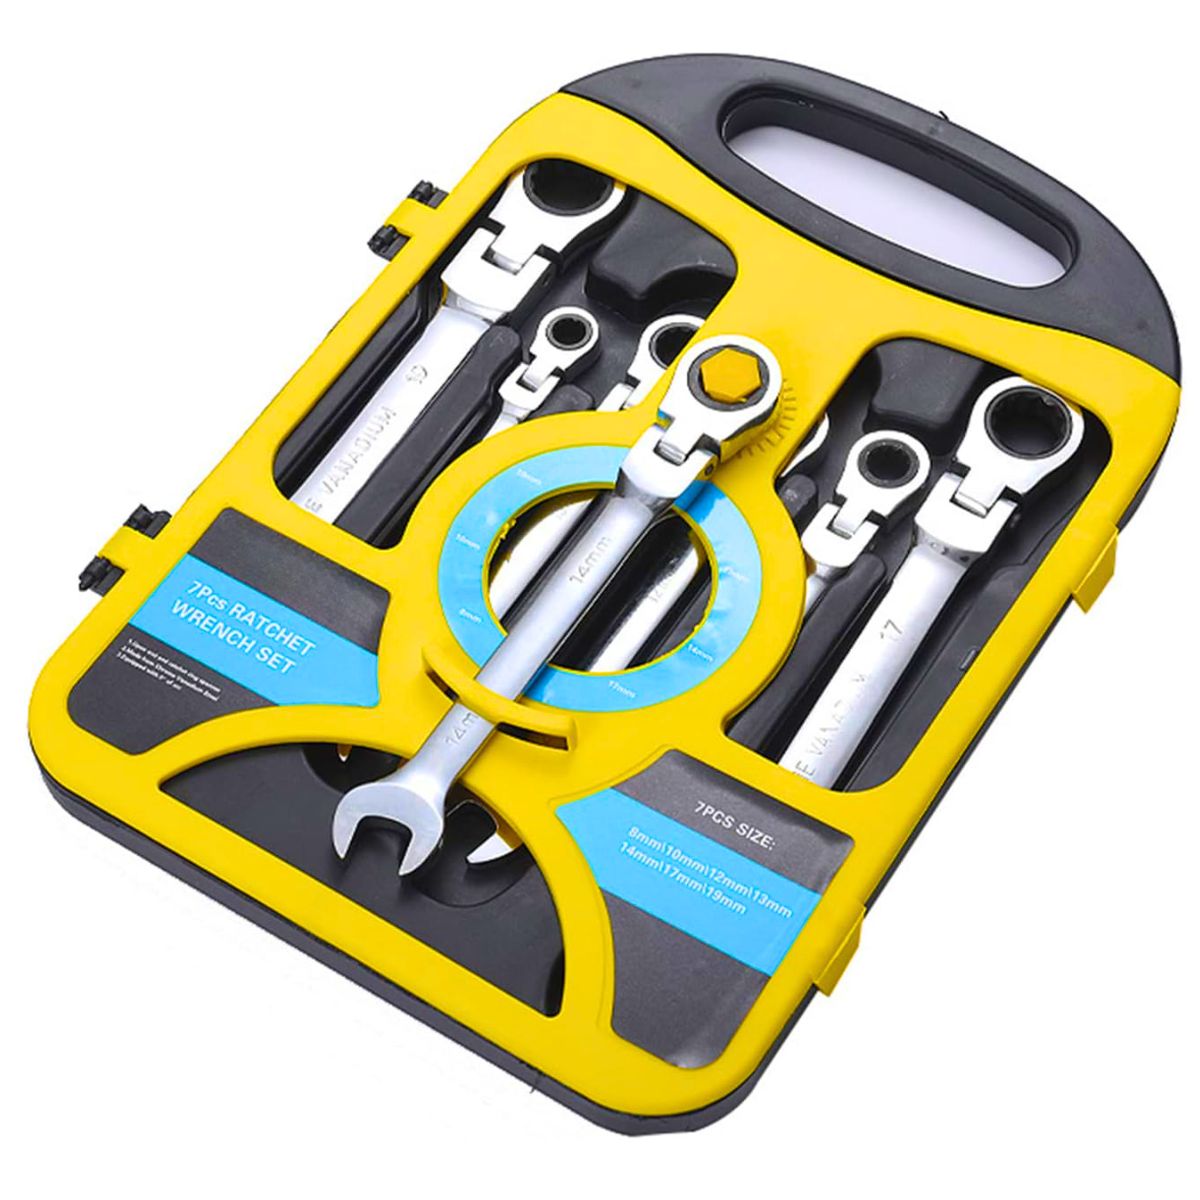 Flexible Head Ratchet Wrench Set - South East Clearance Centre